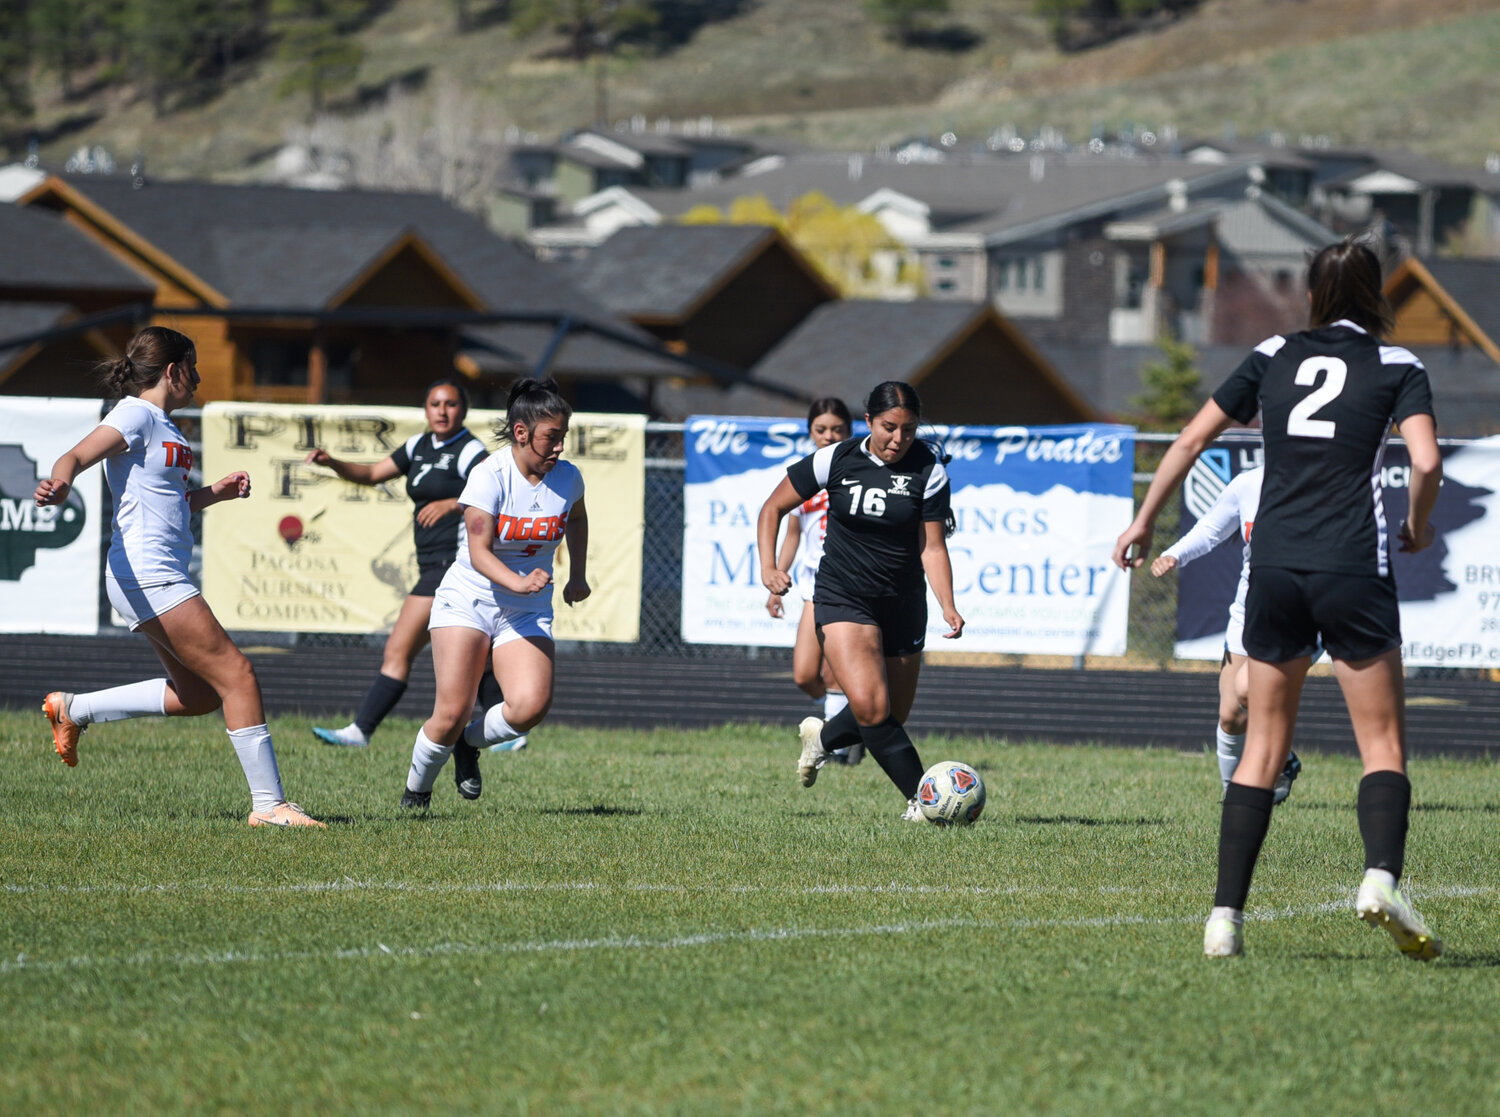 Lady Pirates Lauren Monterroso (left), Jeidy Moreno Echavarria (middle) and Elizabeth Currier (right), work to score during a match against Del Norte at home on April 30. Monterroso and Moreno Echavarria are both seniors, and the match against Del Norte was their last home game.